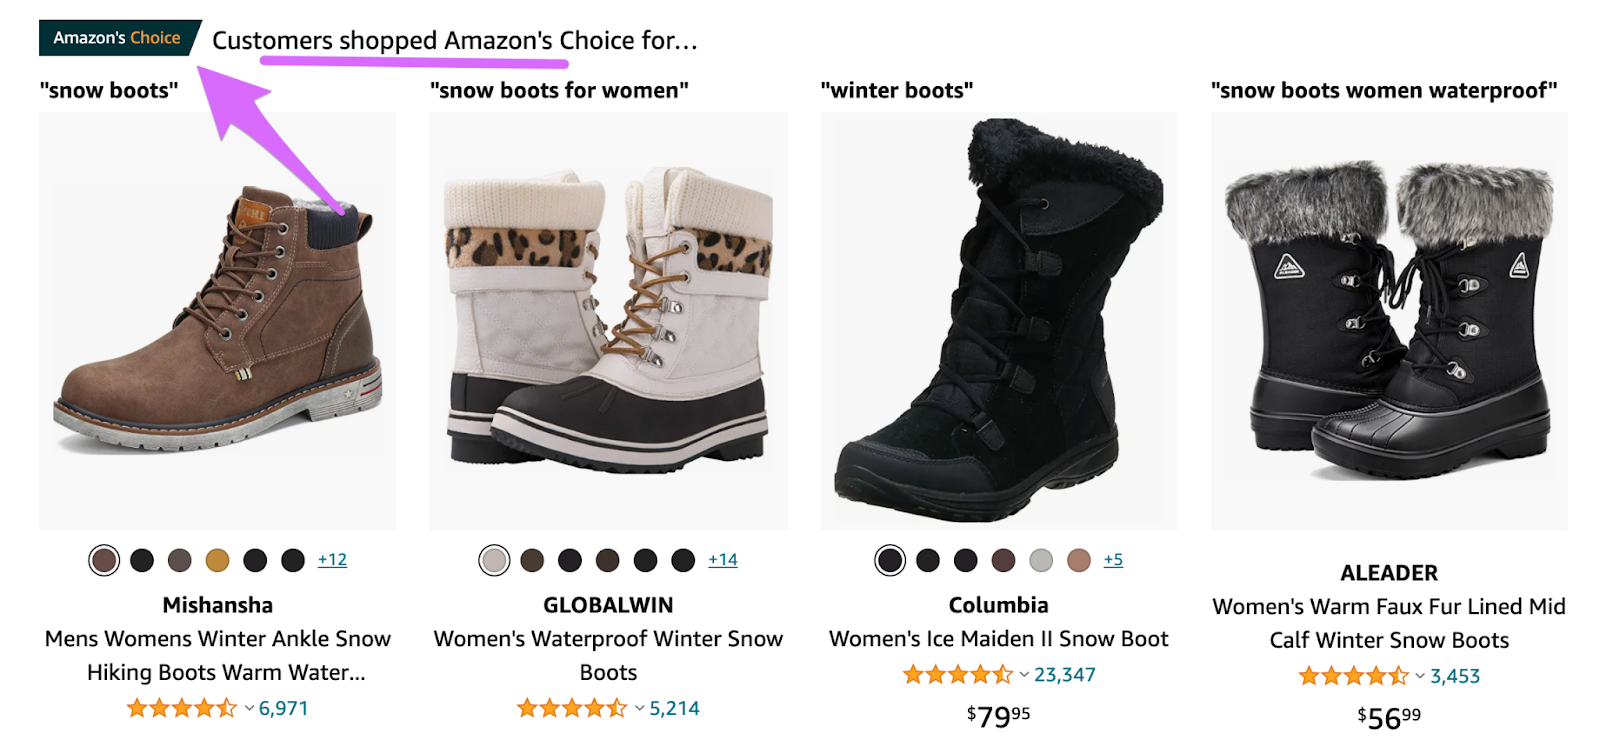 the amazon's choice badge advertising products